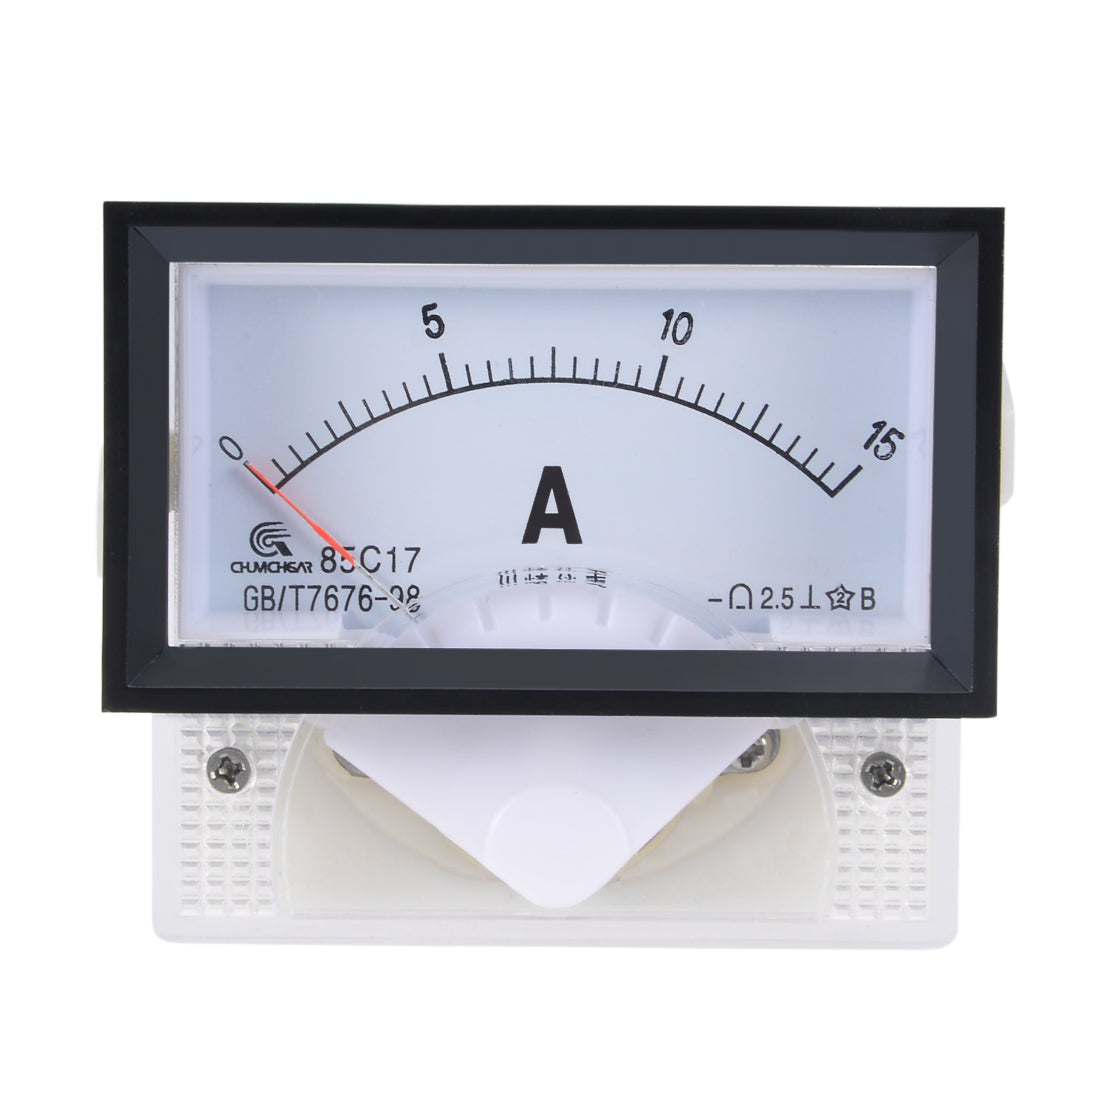 uxcell Uxcell 85C17 Analog Current Panel Meter DC 15A Ammeter for Circuit Testing Ampere Tester Gauge 1 PCS